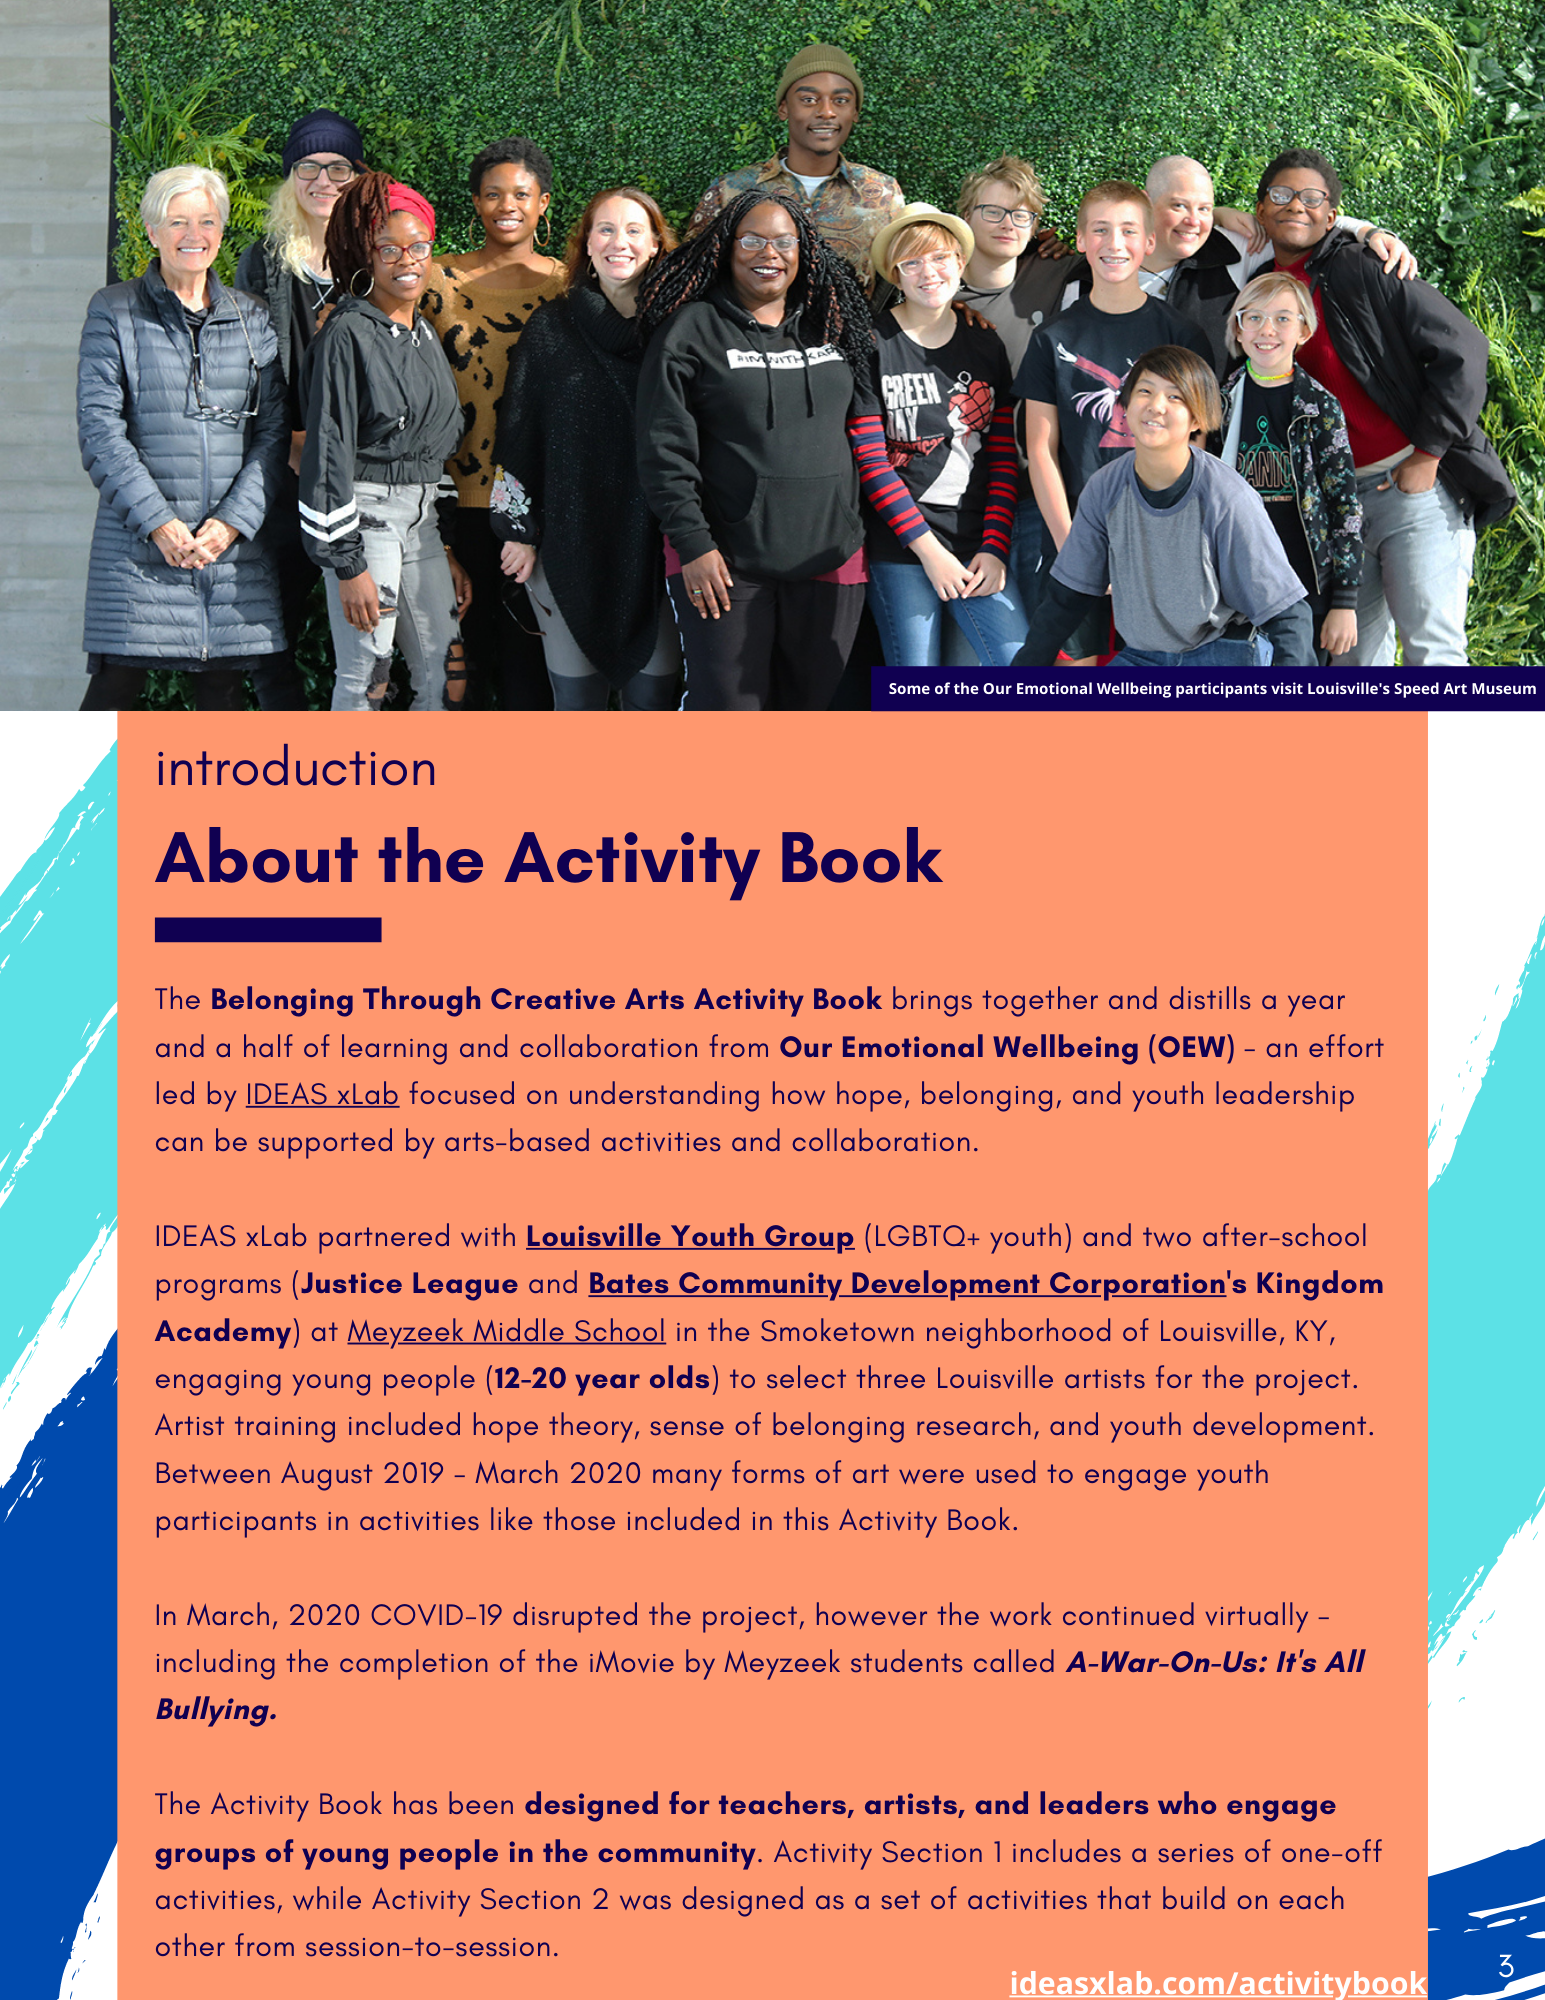 Belonging Through Creative Arts Activity Book published by IDEAS xLab Introduction